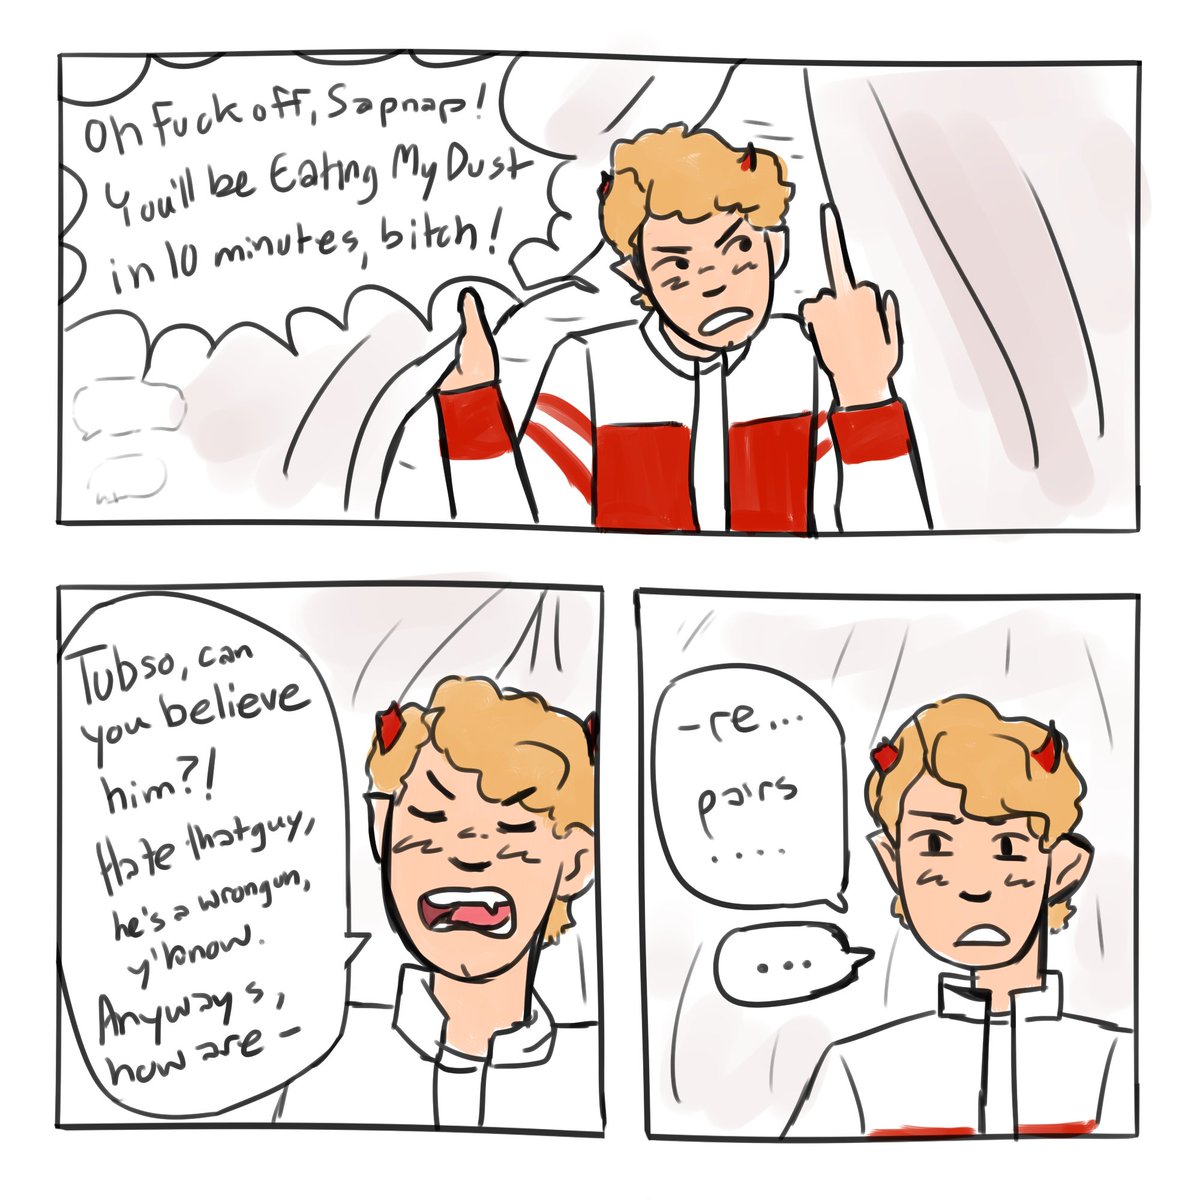 rushed this but here's a comic from an au i've had for a while. cool futuristic au where the dsmp's just about (illegal) street racing (1/3)
{ #tommyinnitfanart , #tubbofanart , #ranboofanart } 